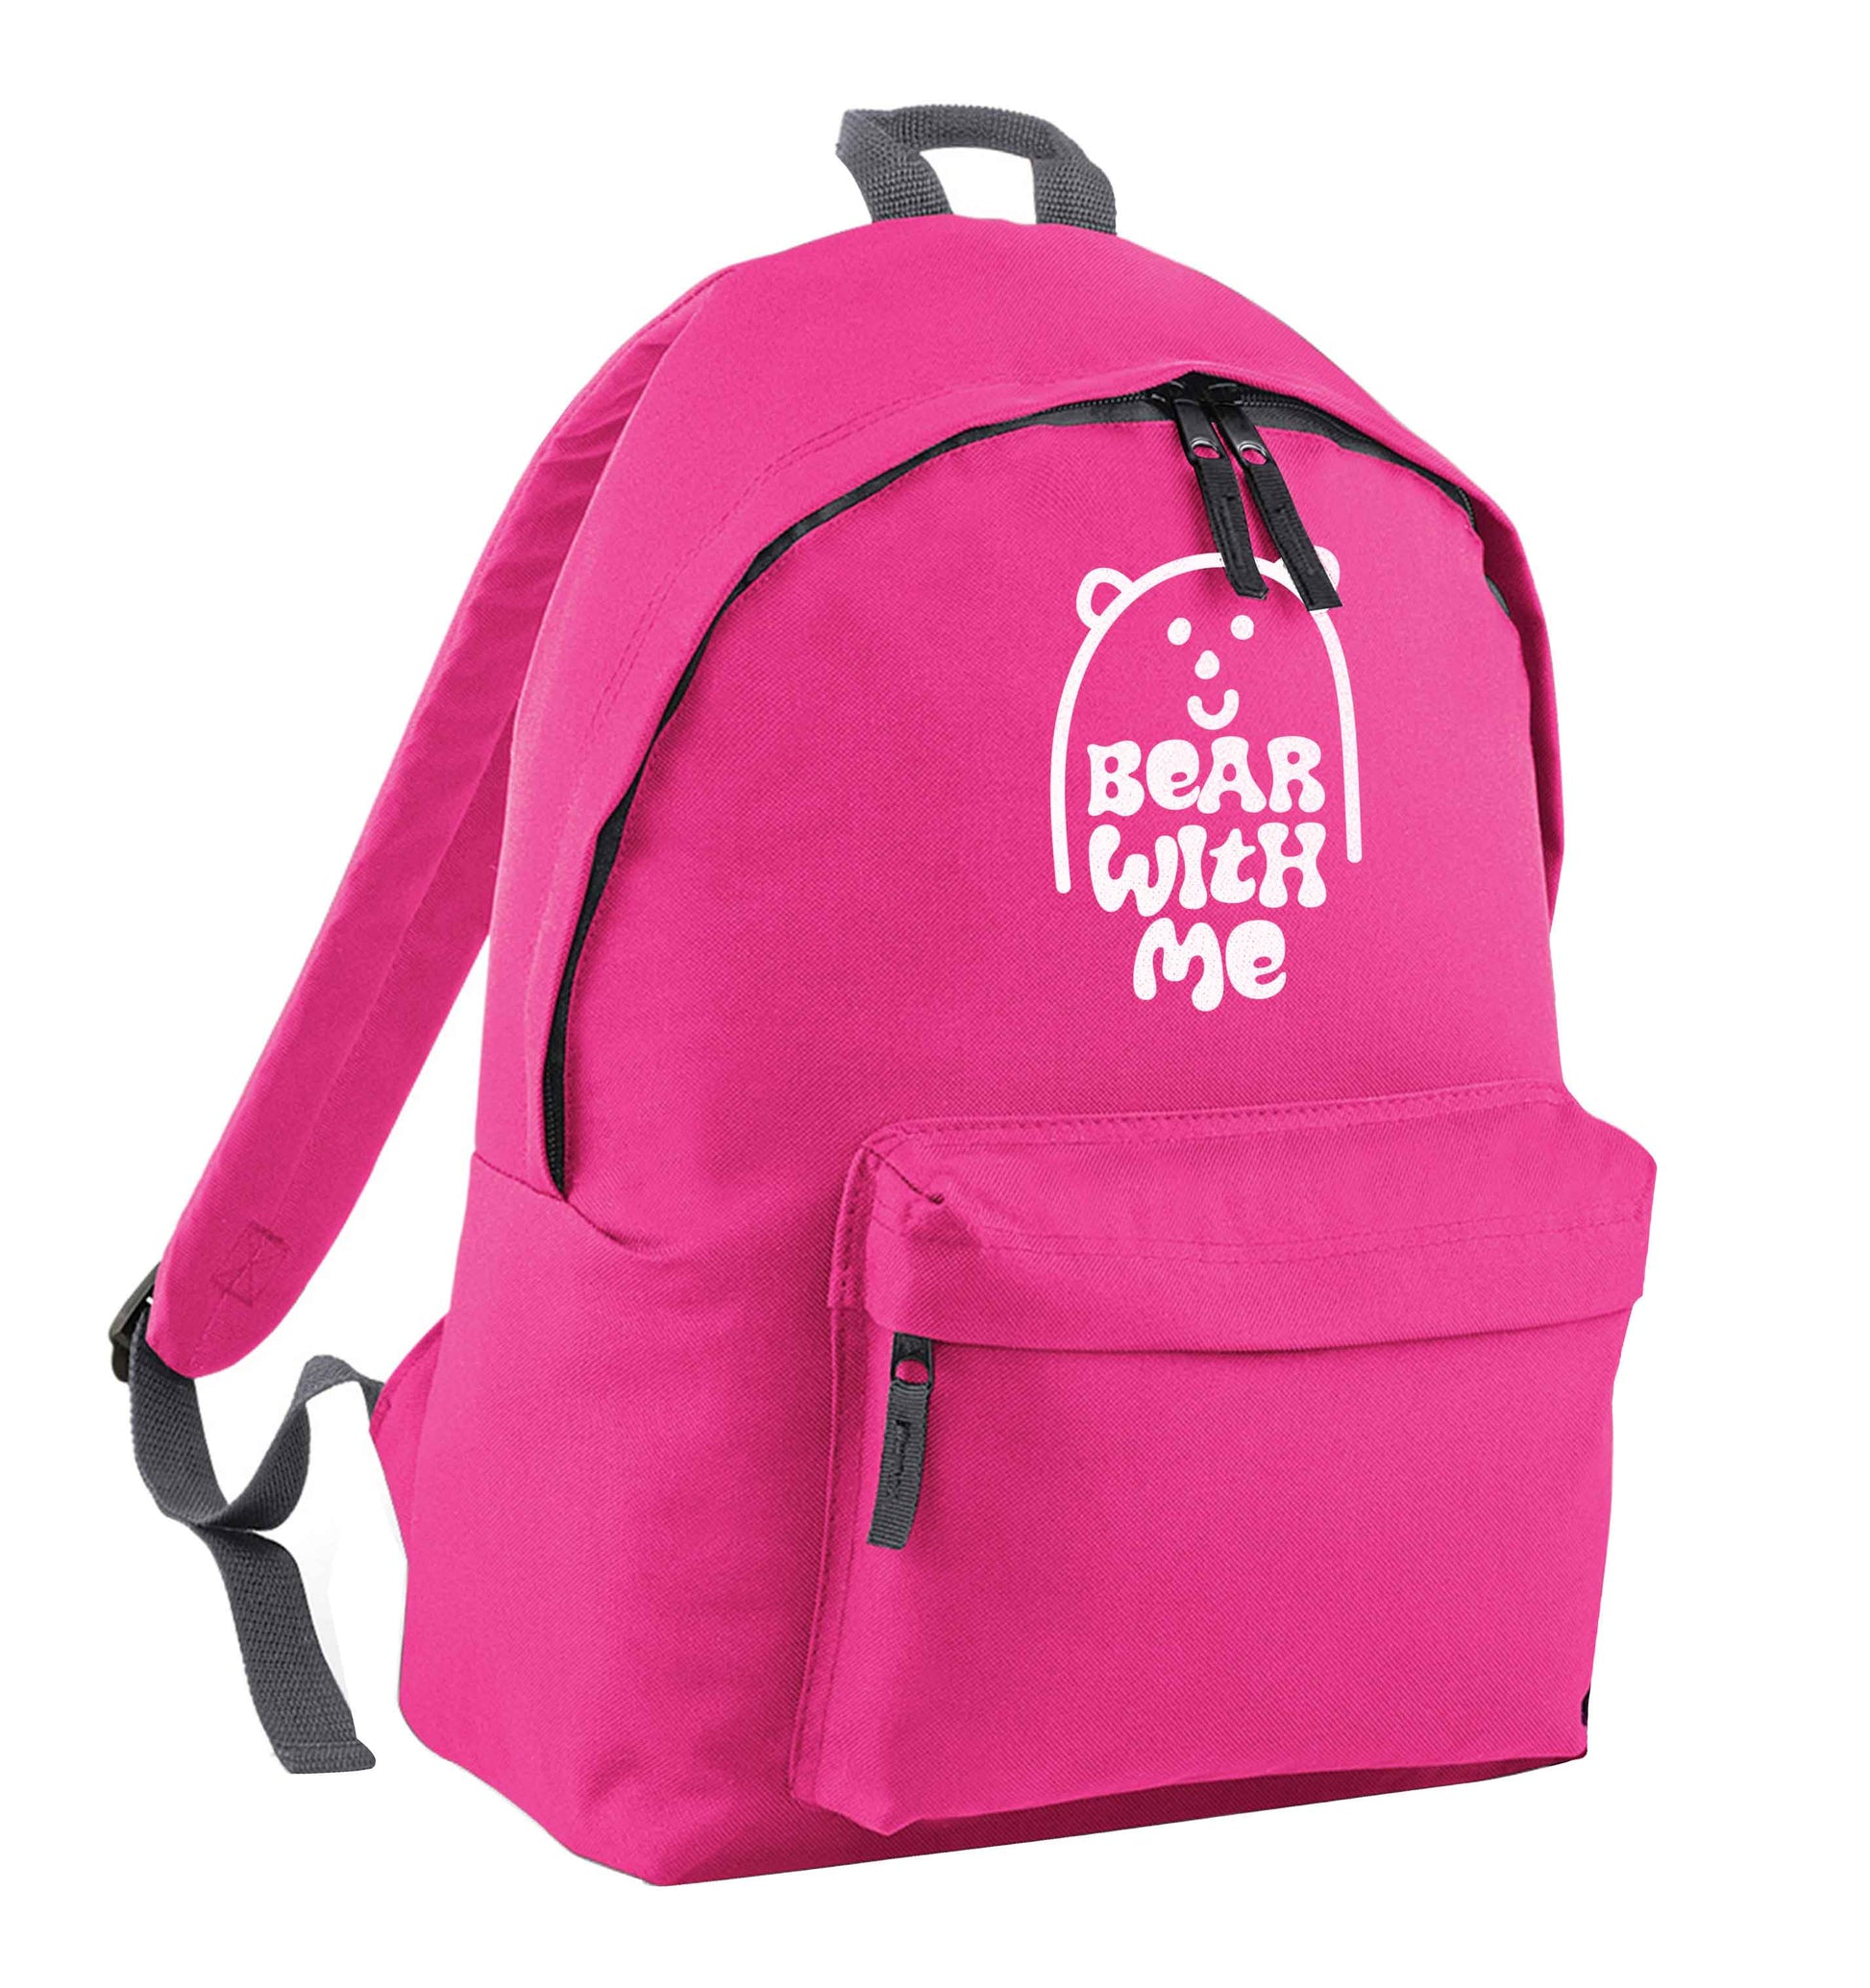 Bear With Me Kit pink children's backpack